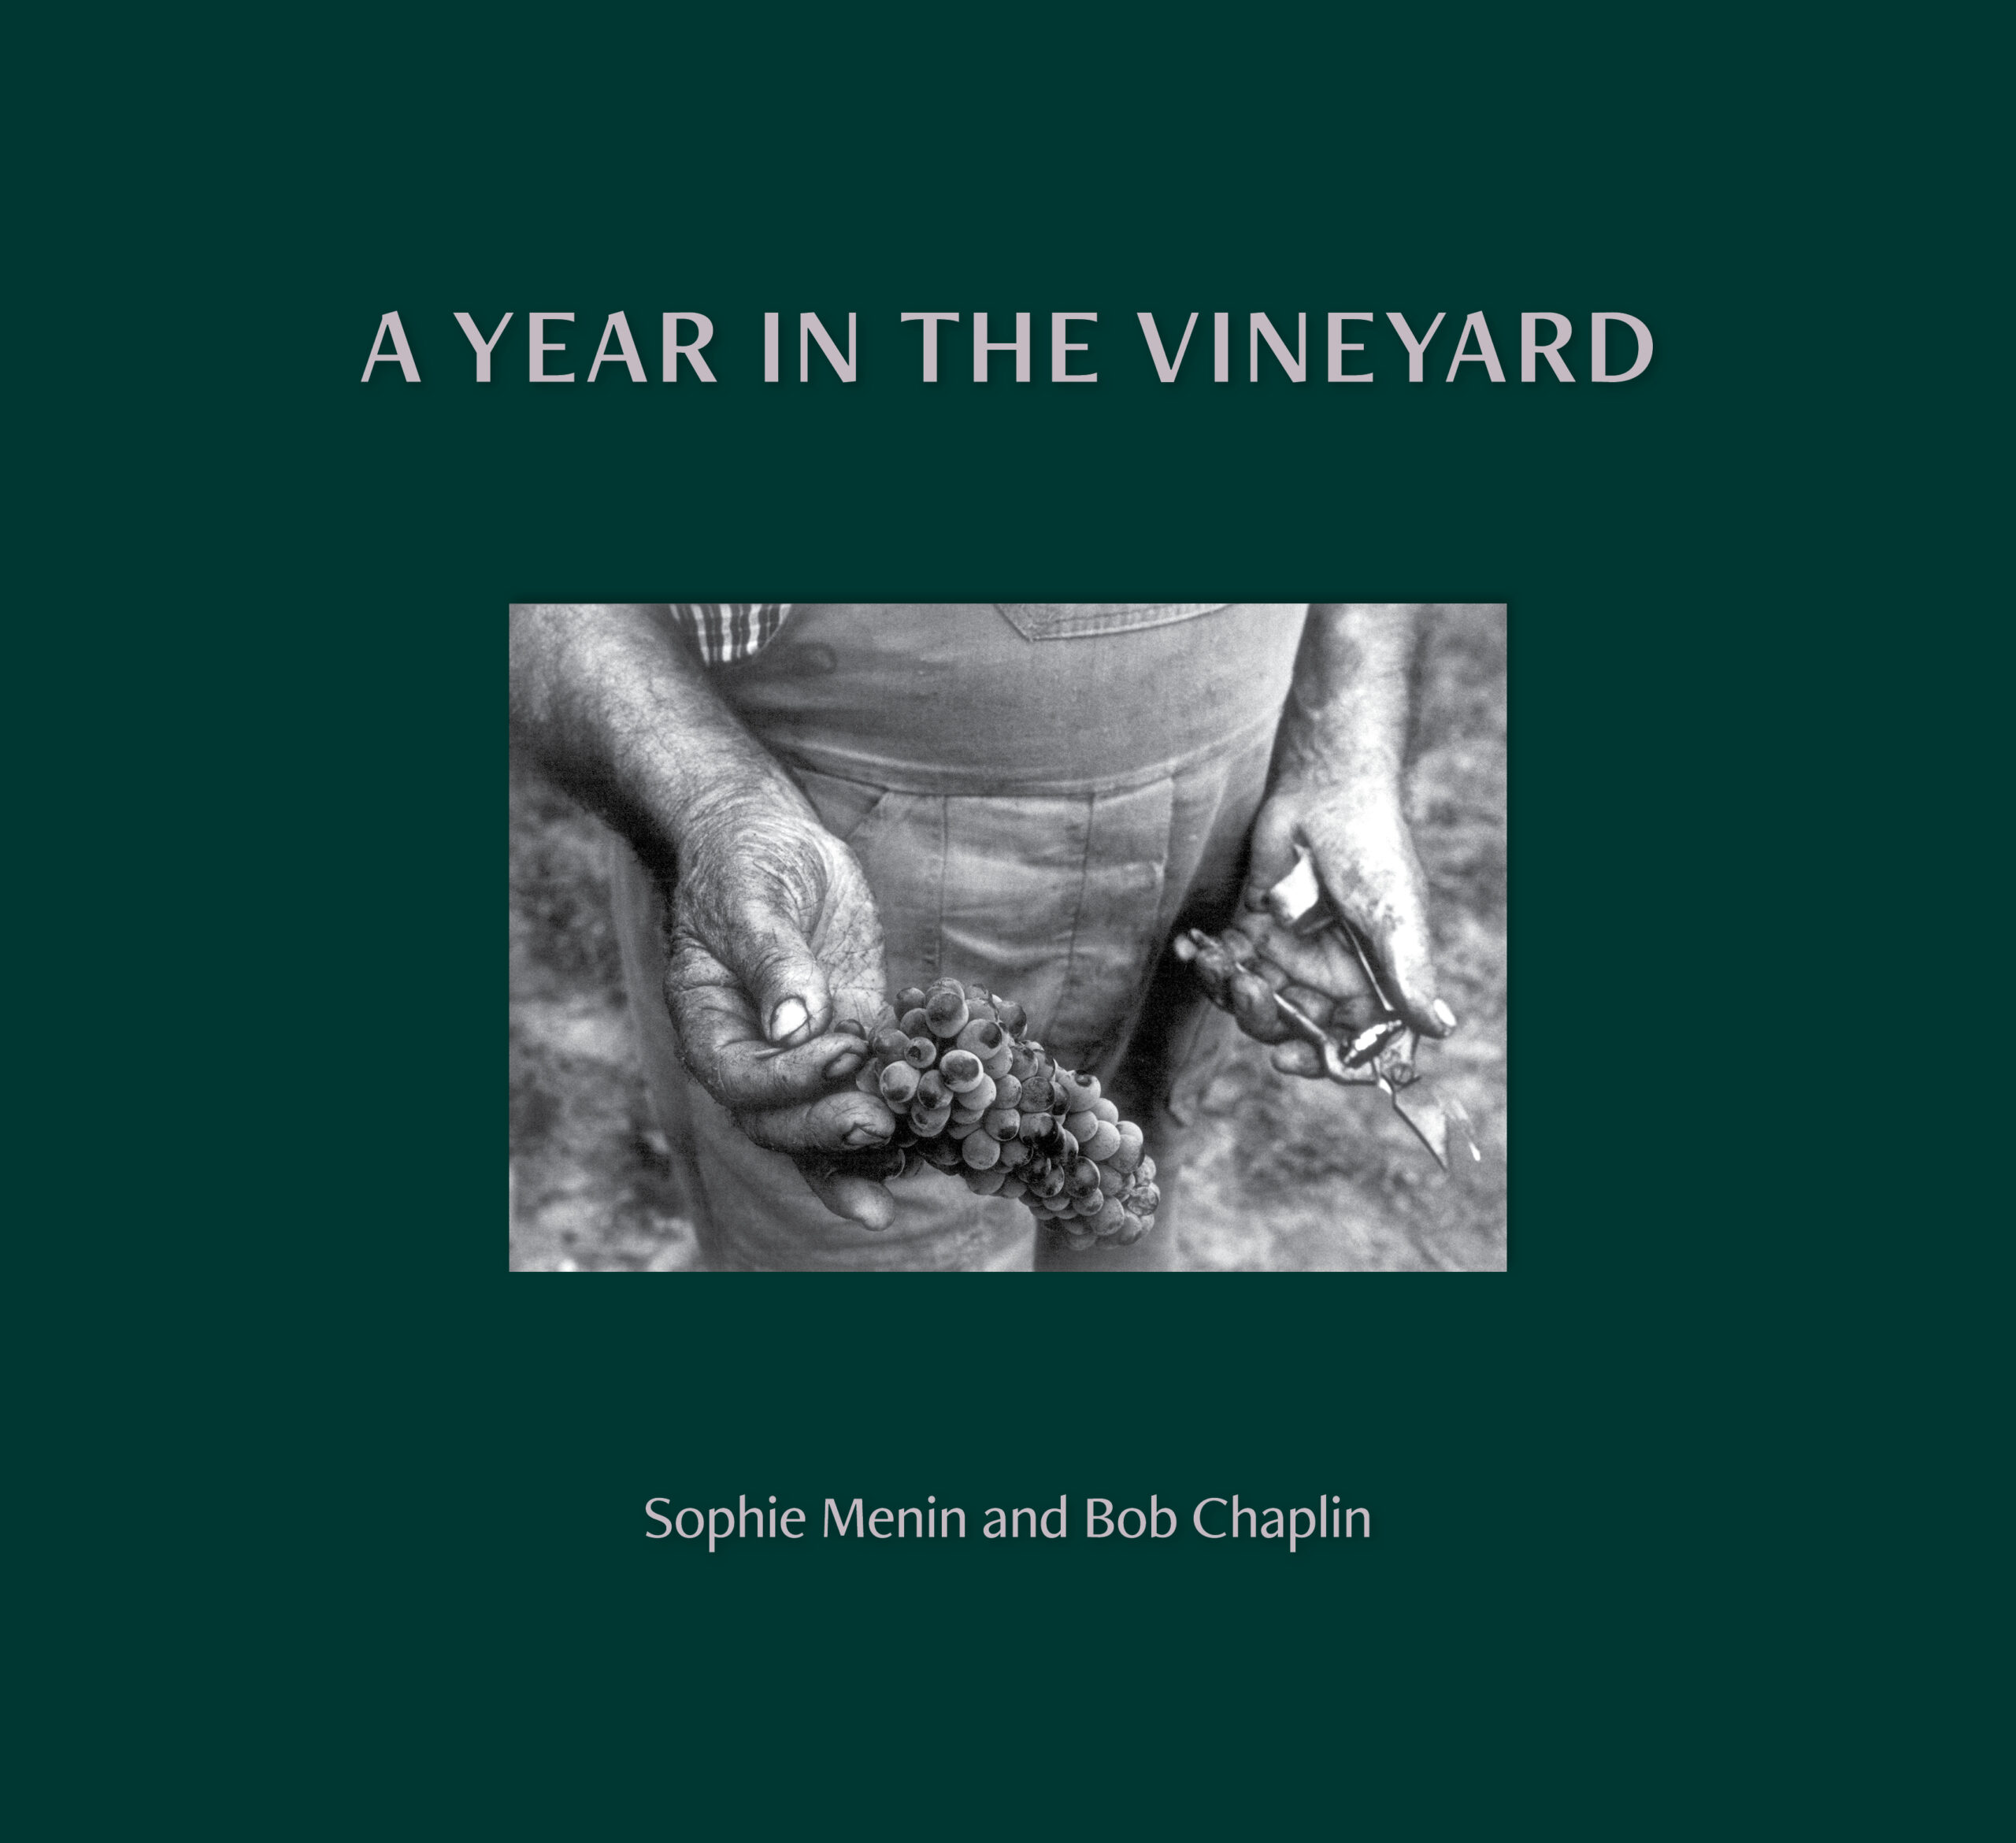 A YEAR IN THE VINEYARD by Sophie Menin and Bob Chaplin